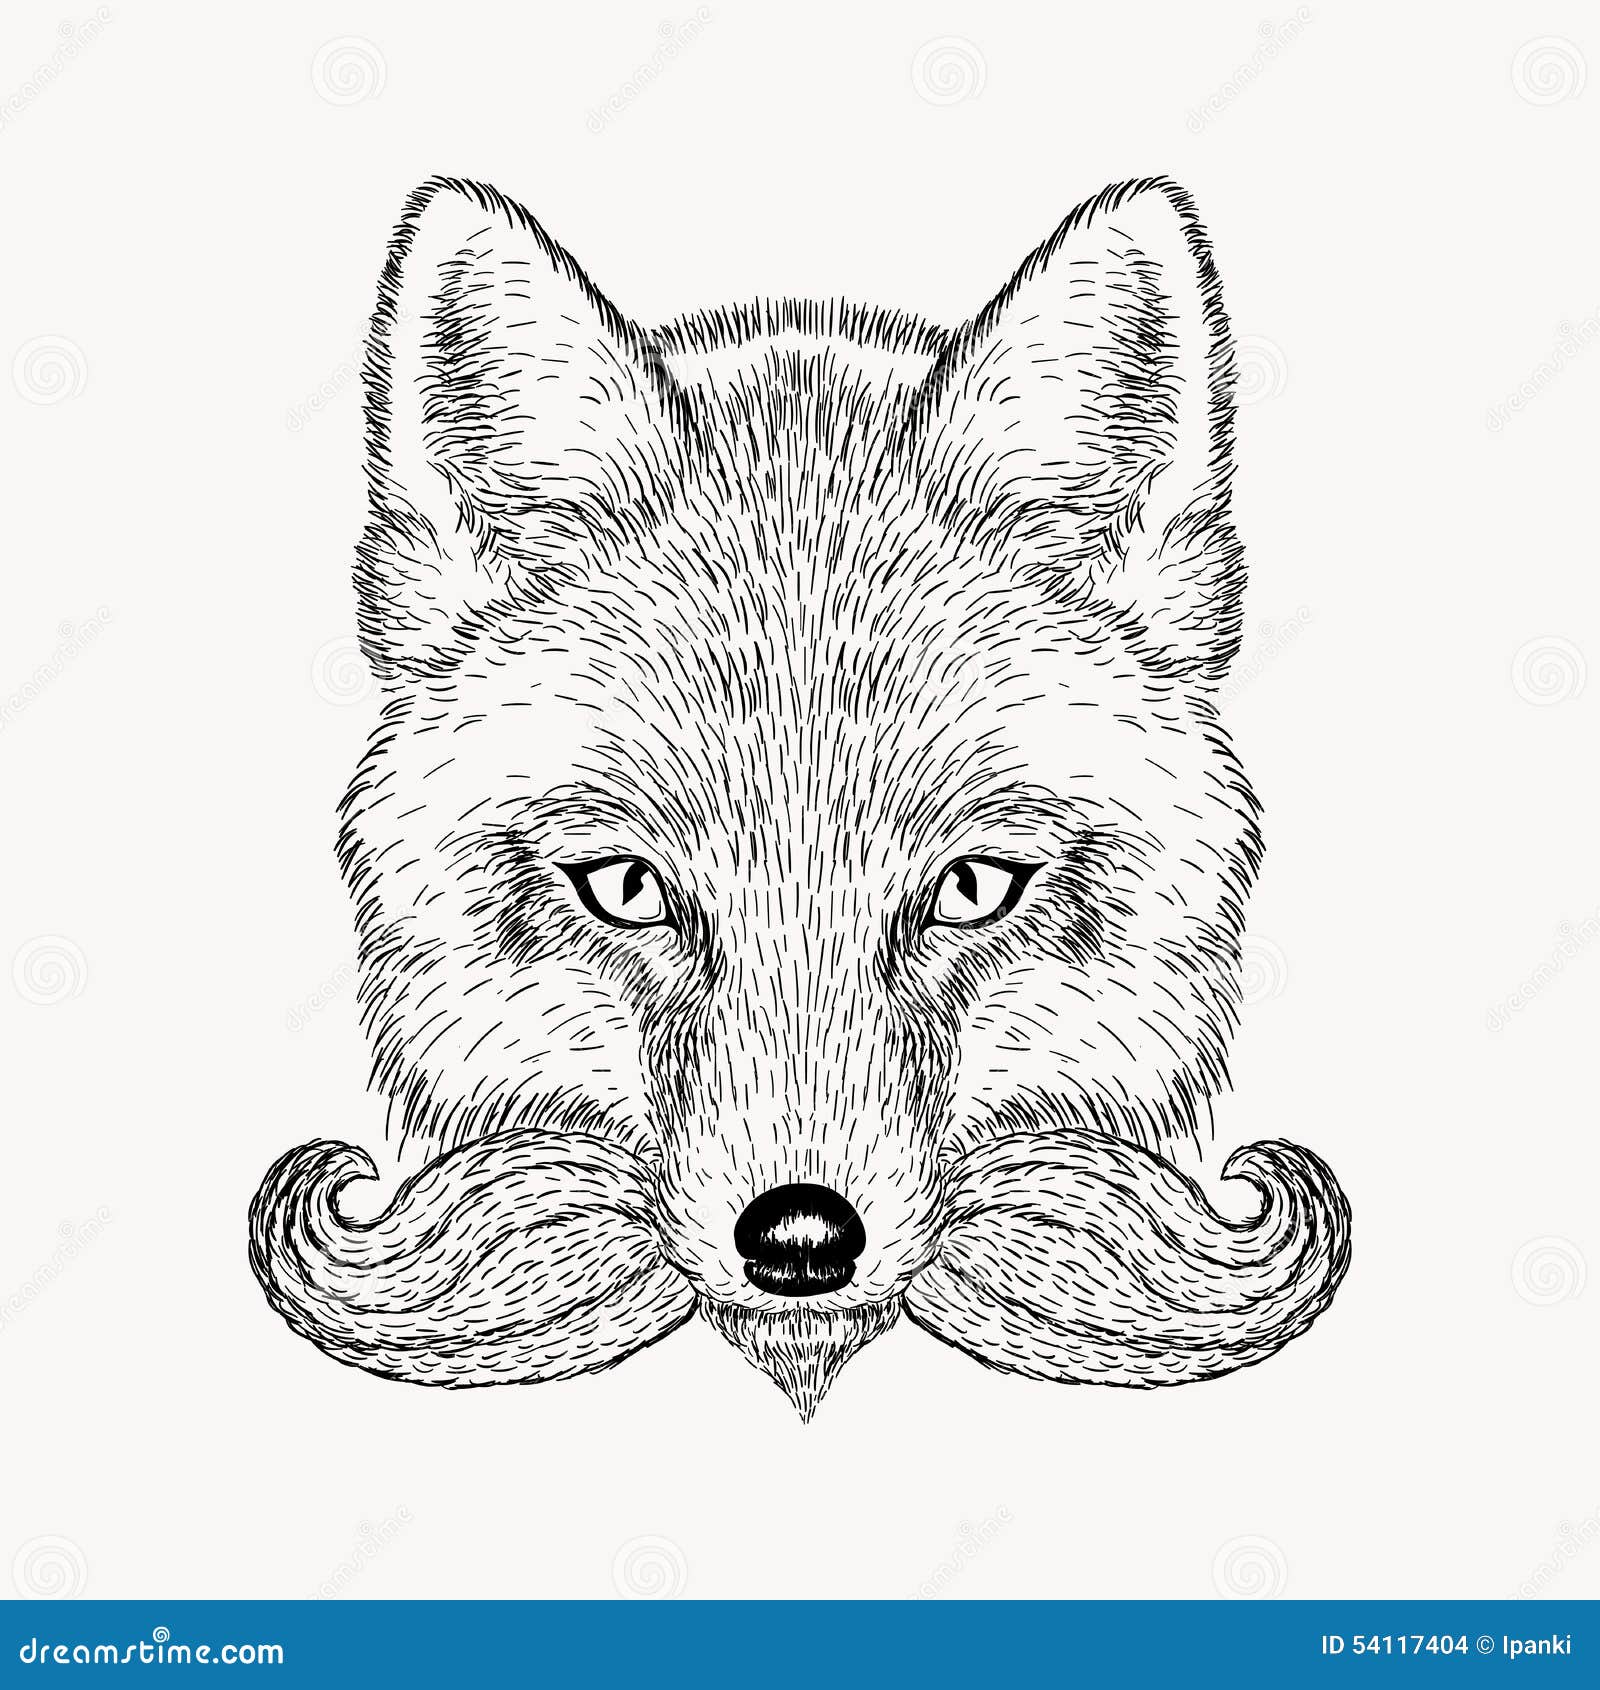 sketch fox with a beard and moustache.